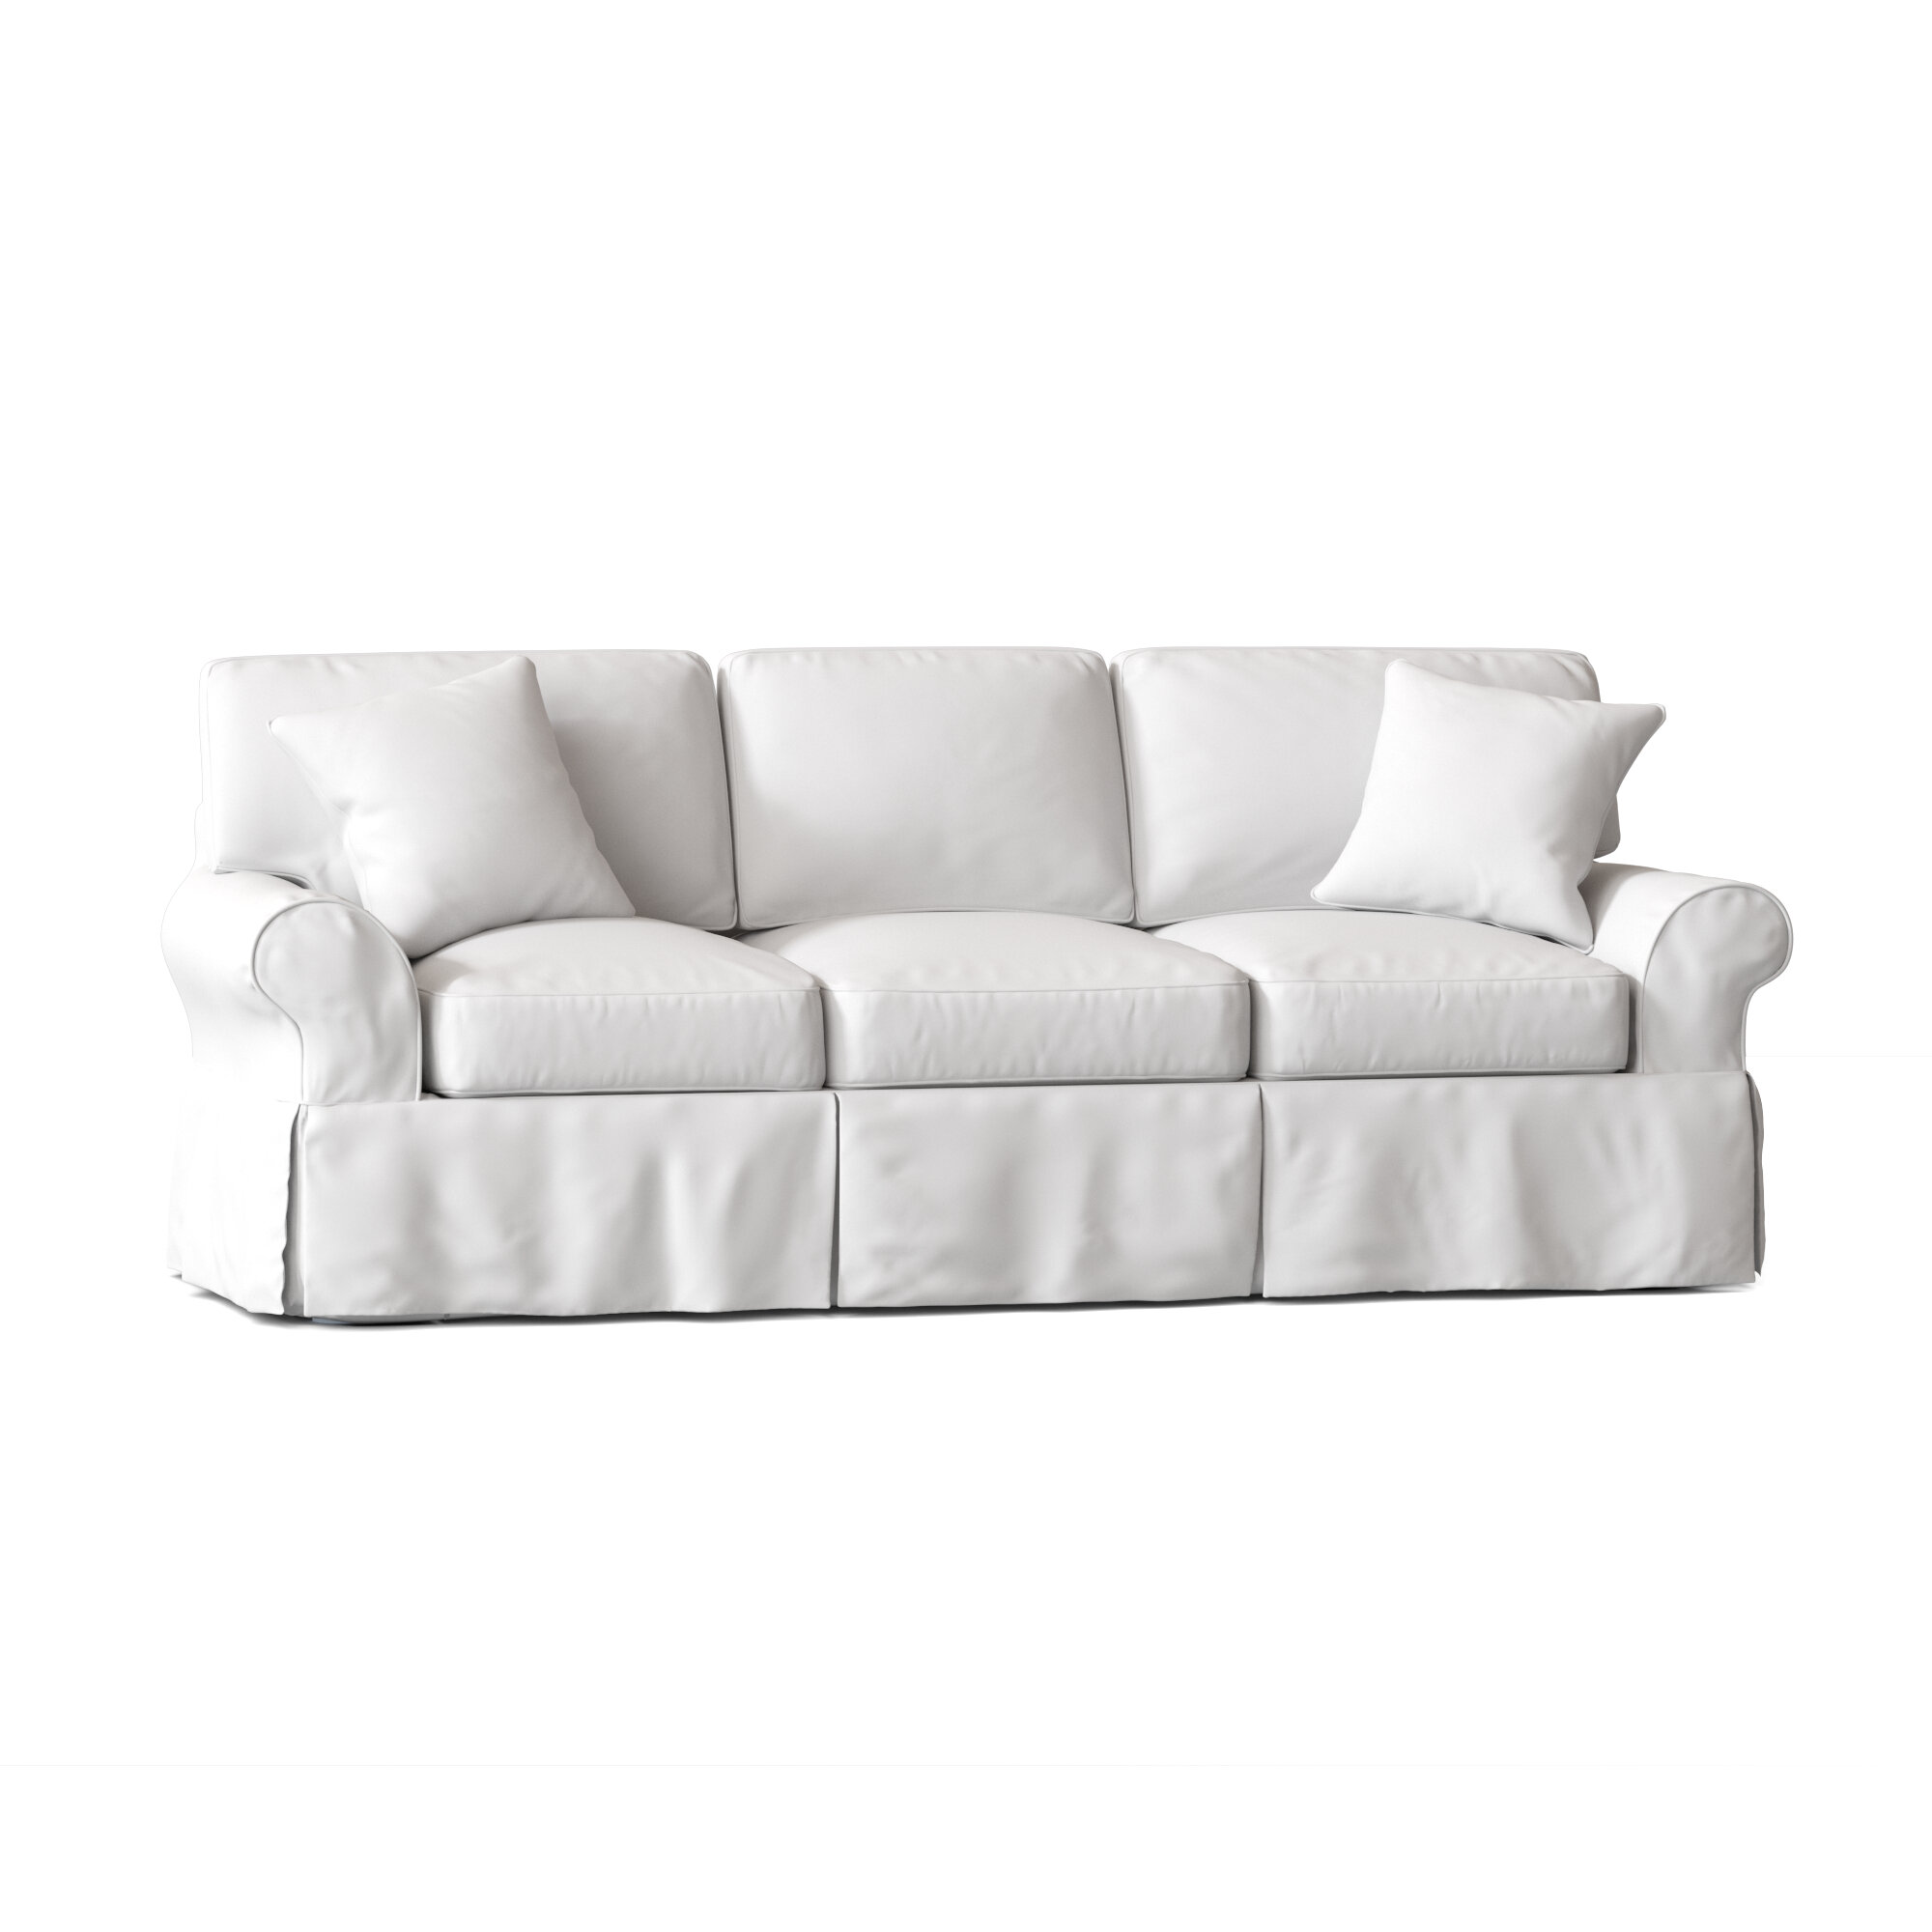 Lurdes 88” Rolled Arm Slipcovered Sofa Bed with Reversible Cushions